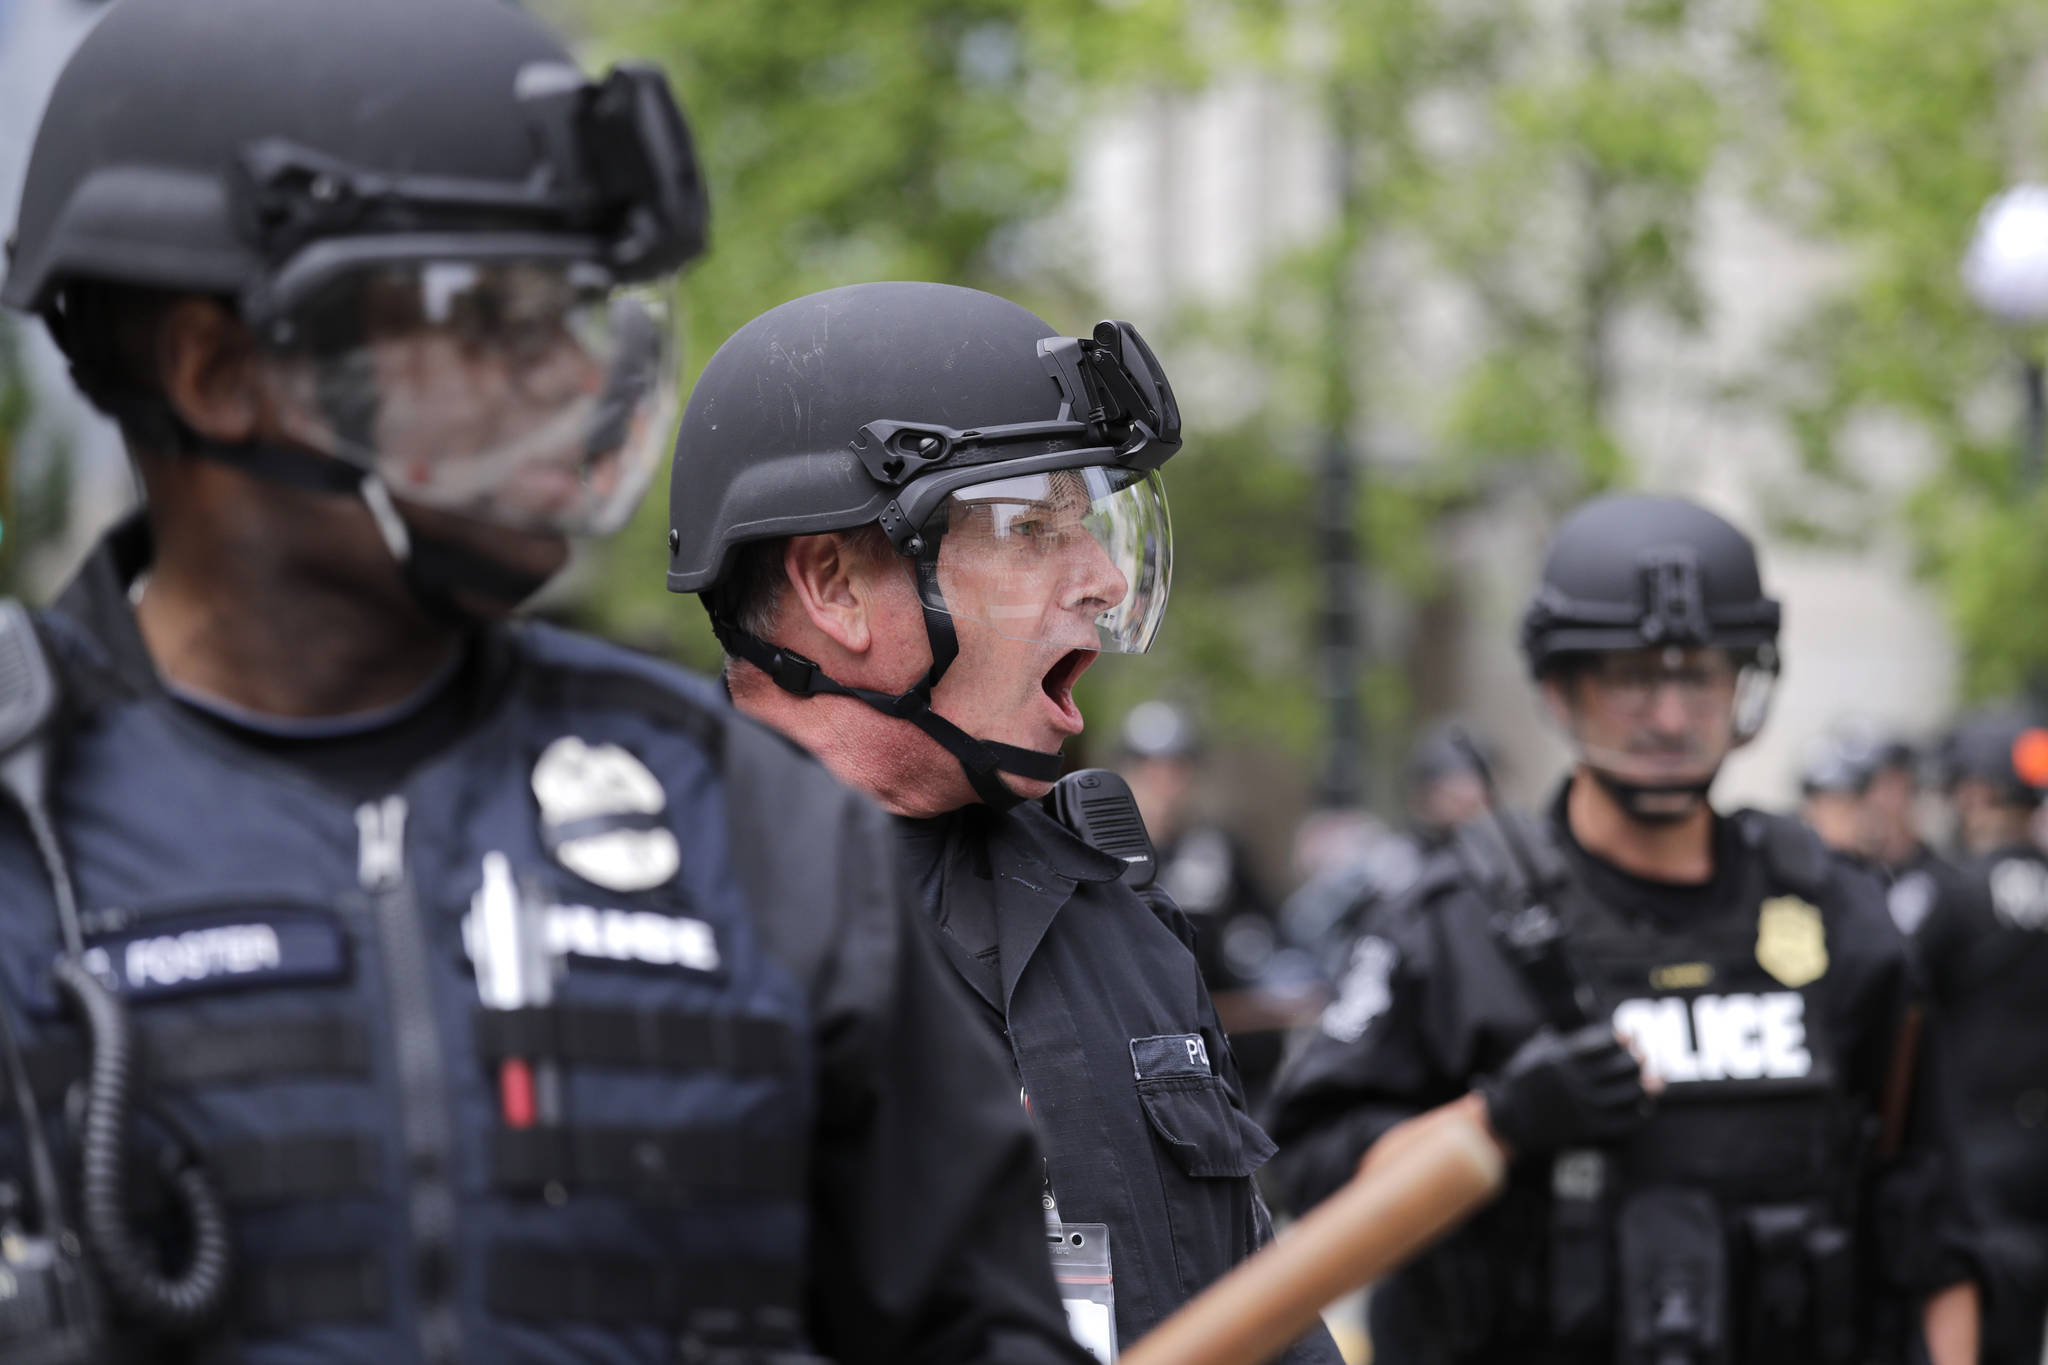 A Seattle police officer yells out orders at Seattle City Hall as protesters march toward them Wednesday, June 3, 2020, in Seattle, following protests over the death of George Floyd, a black man who died in police custody in Minneapolis. (AP Photo/Elaine Thompson)